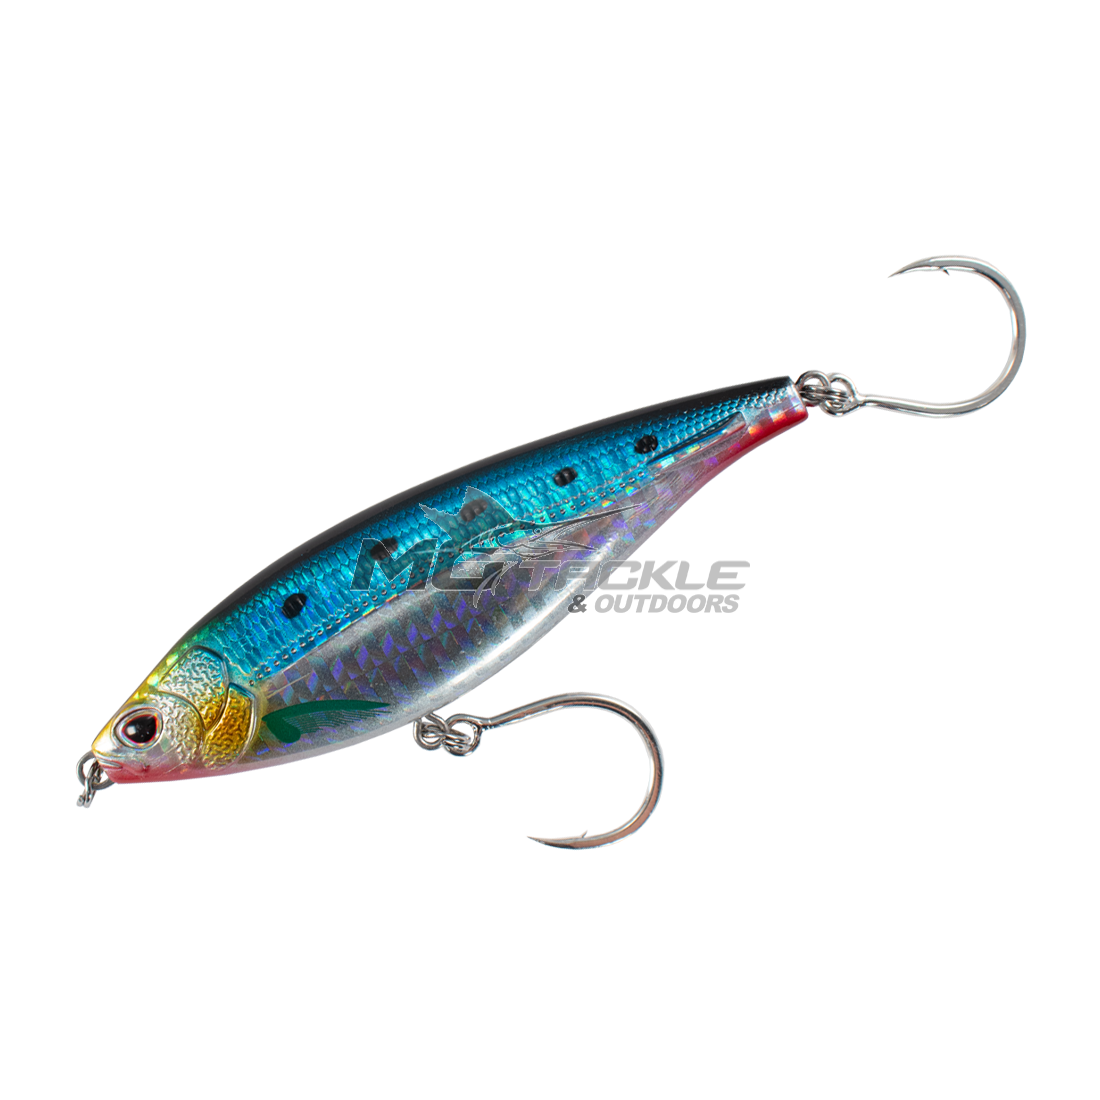 Nomad Design Madscad AT SSNK Lure